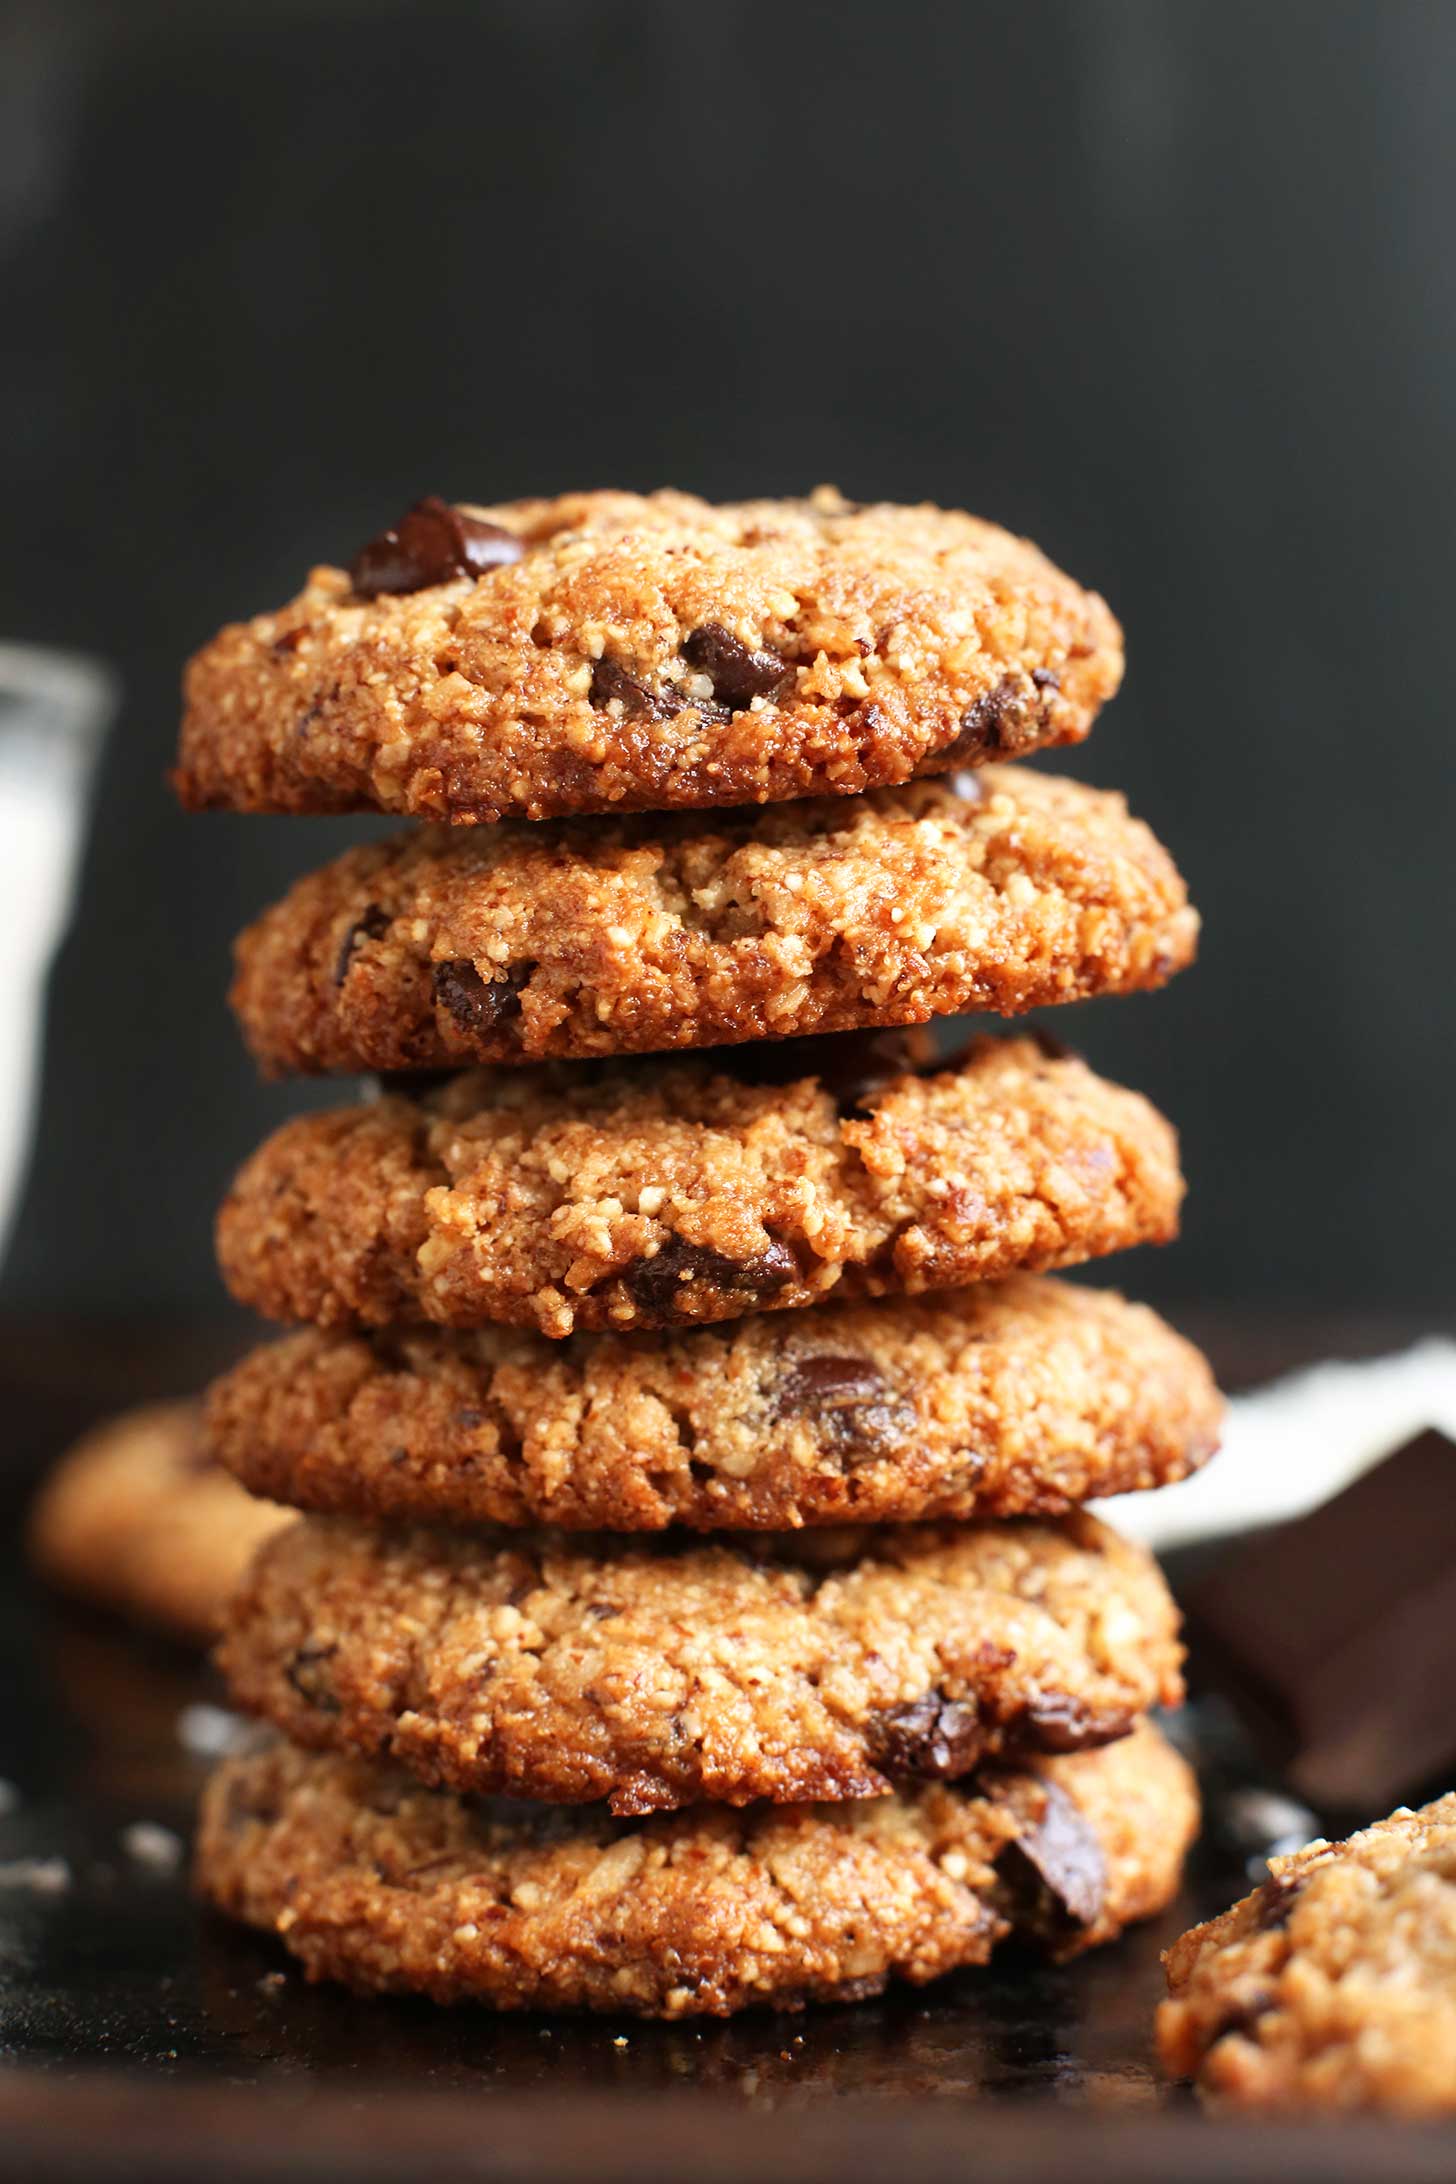 Stacks of crunchy on the outside, chewy on the inside gluten-free vegan chocolate chip cookies